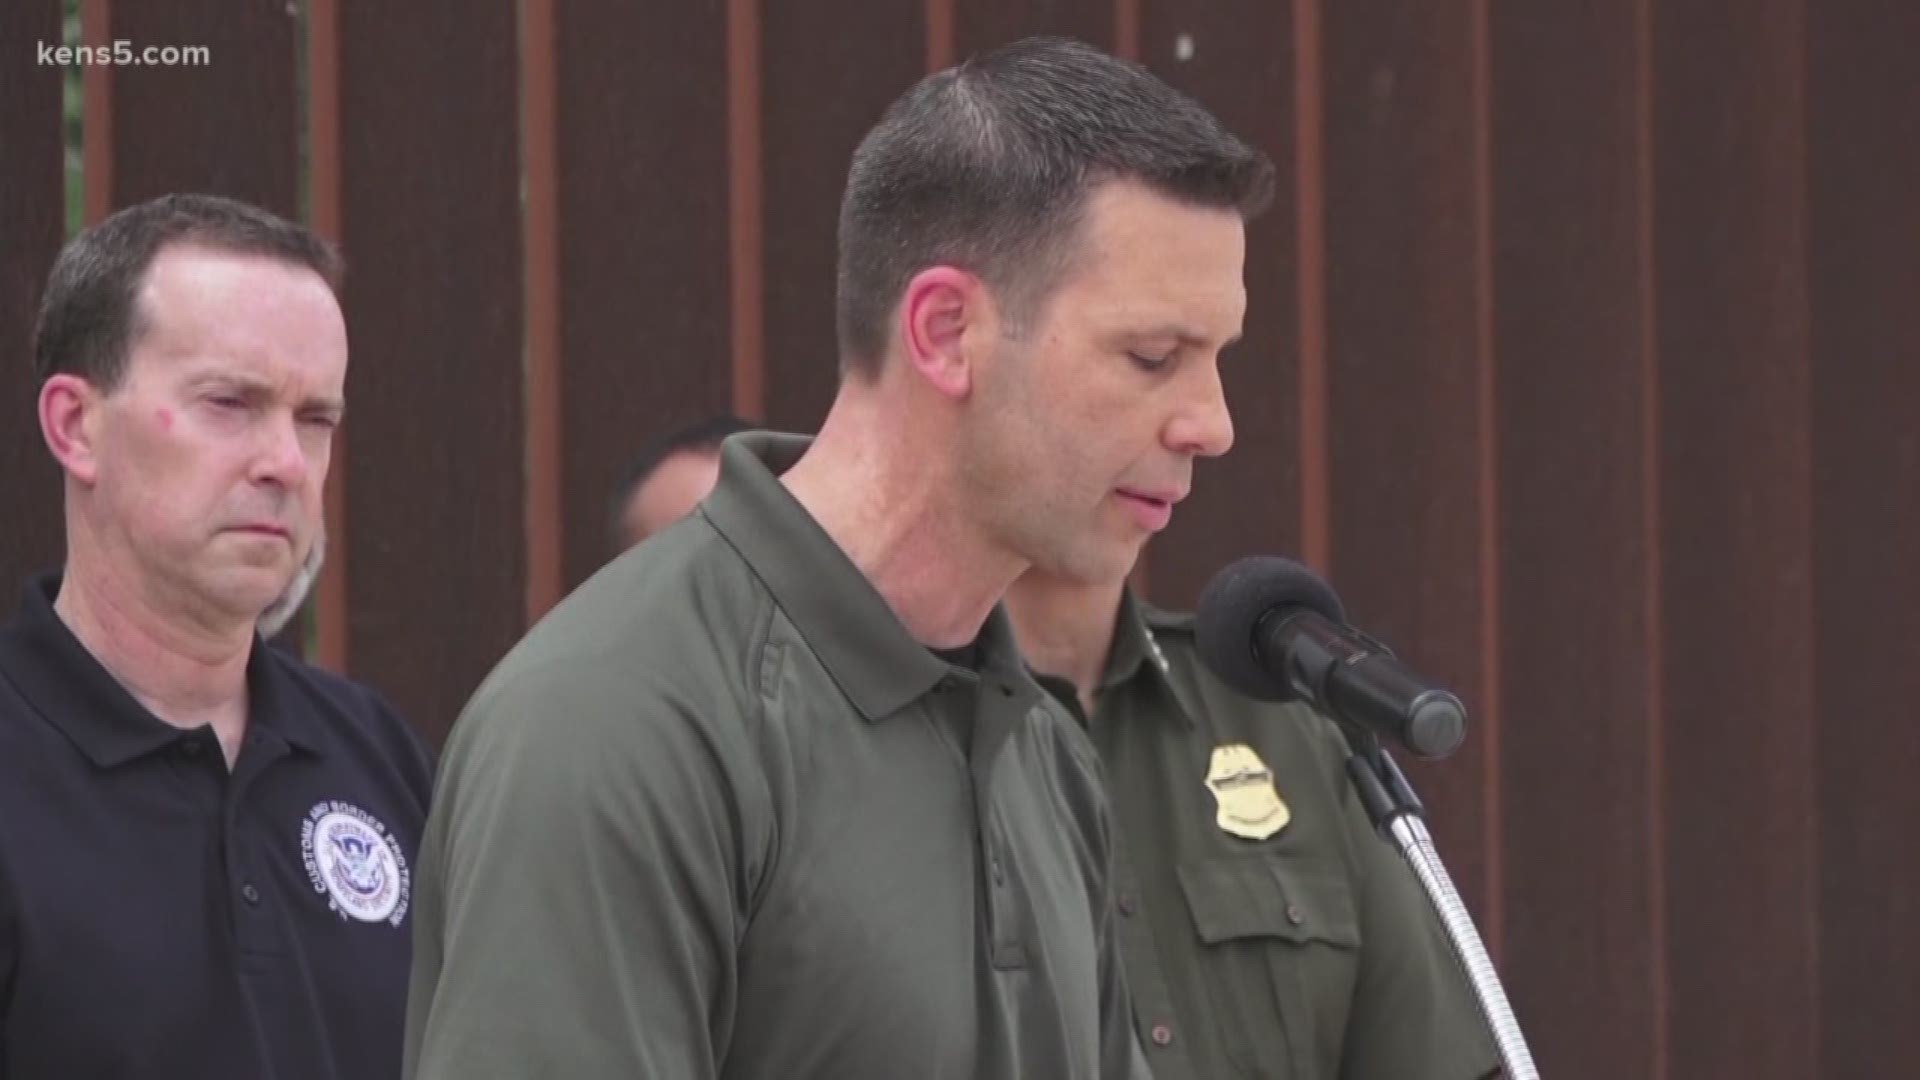 "The system is full and we're beyond capacity," acting DHS Secretary Kevin McAleenan said.